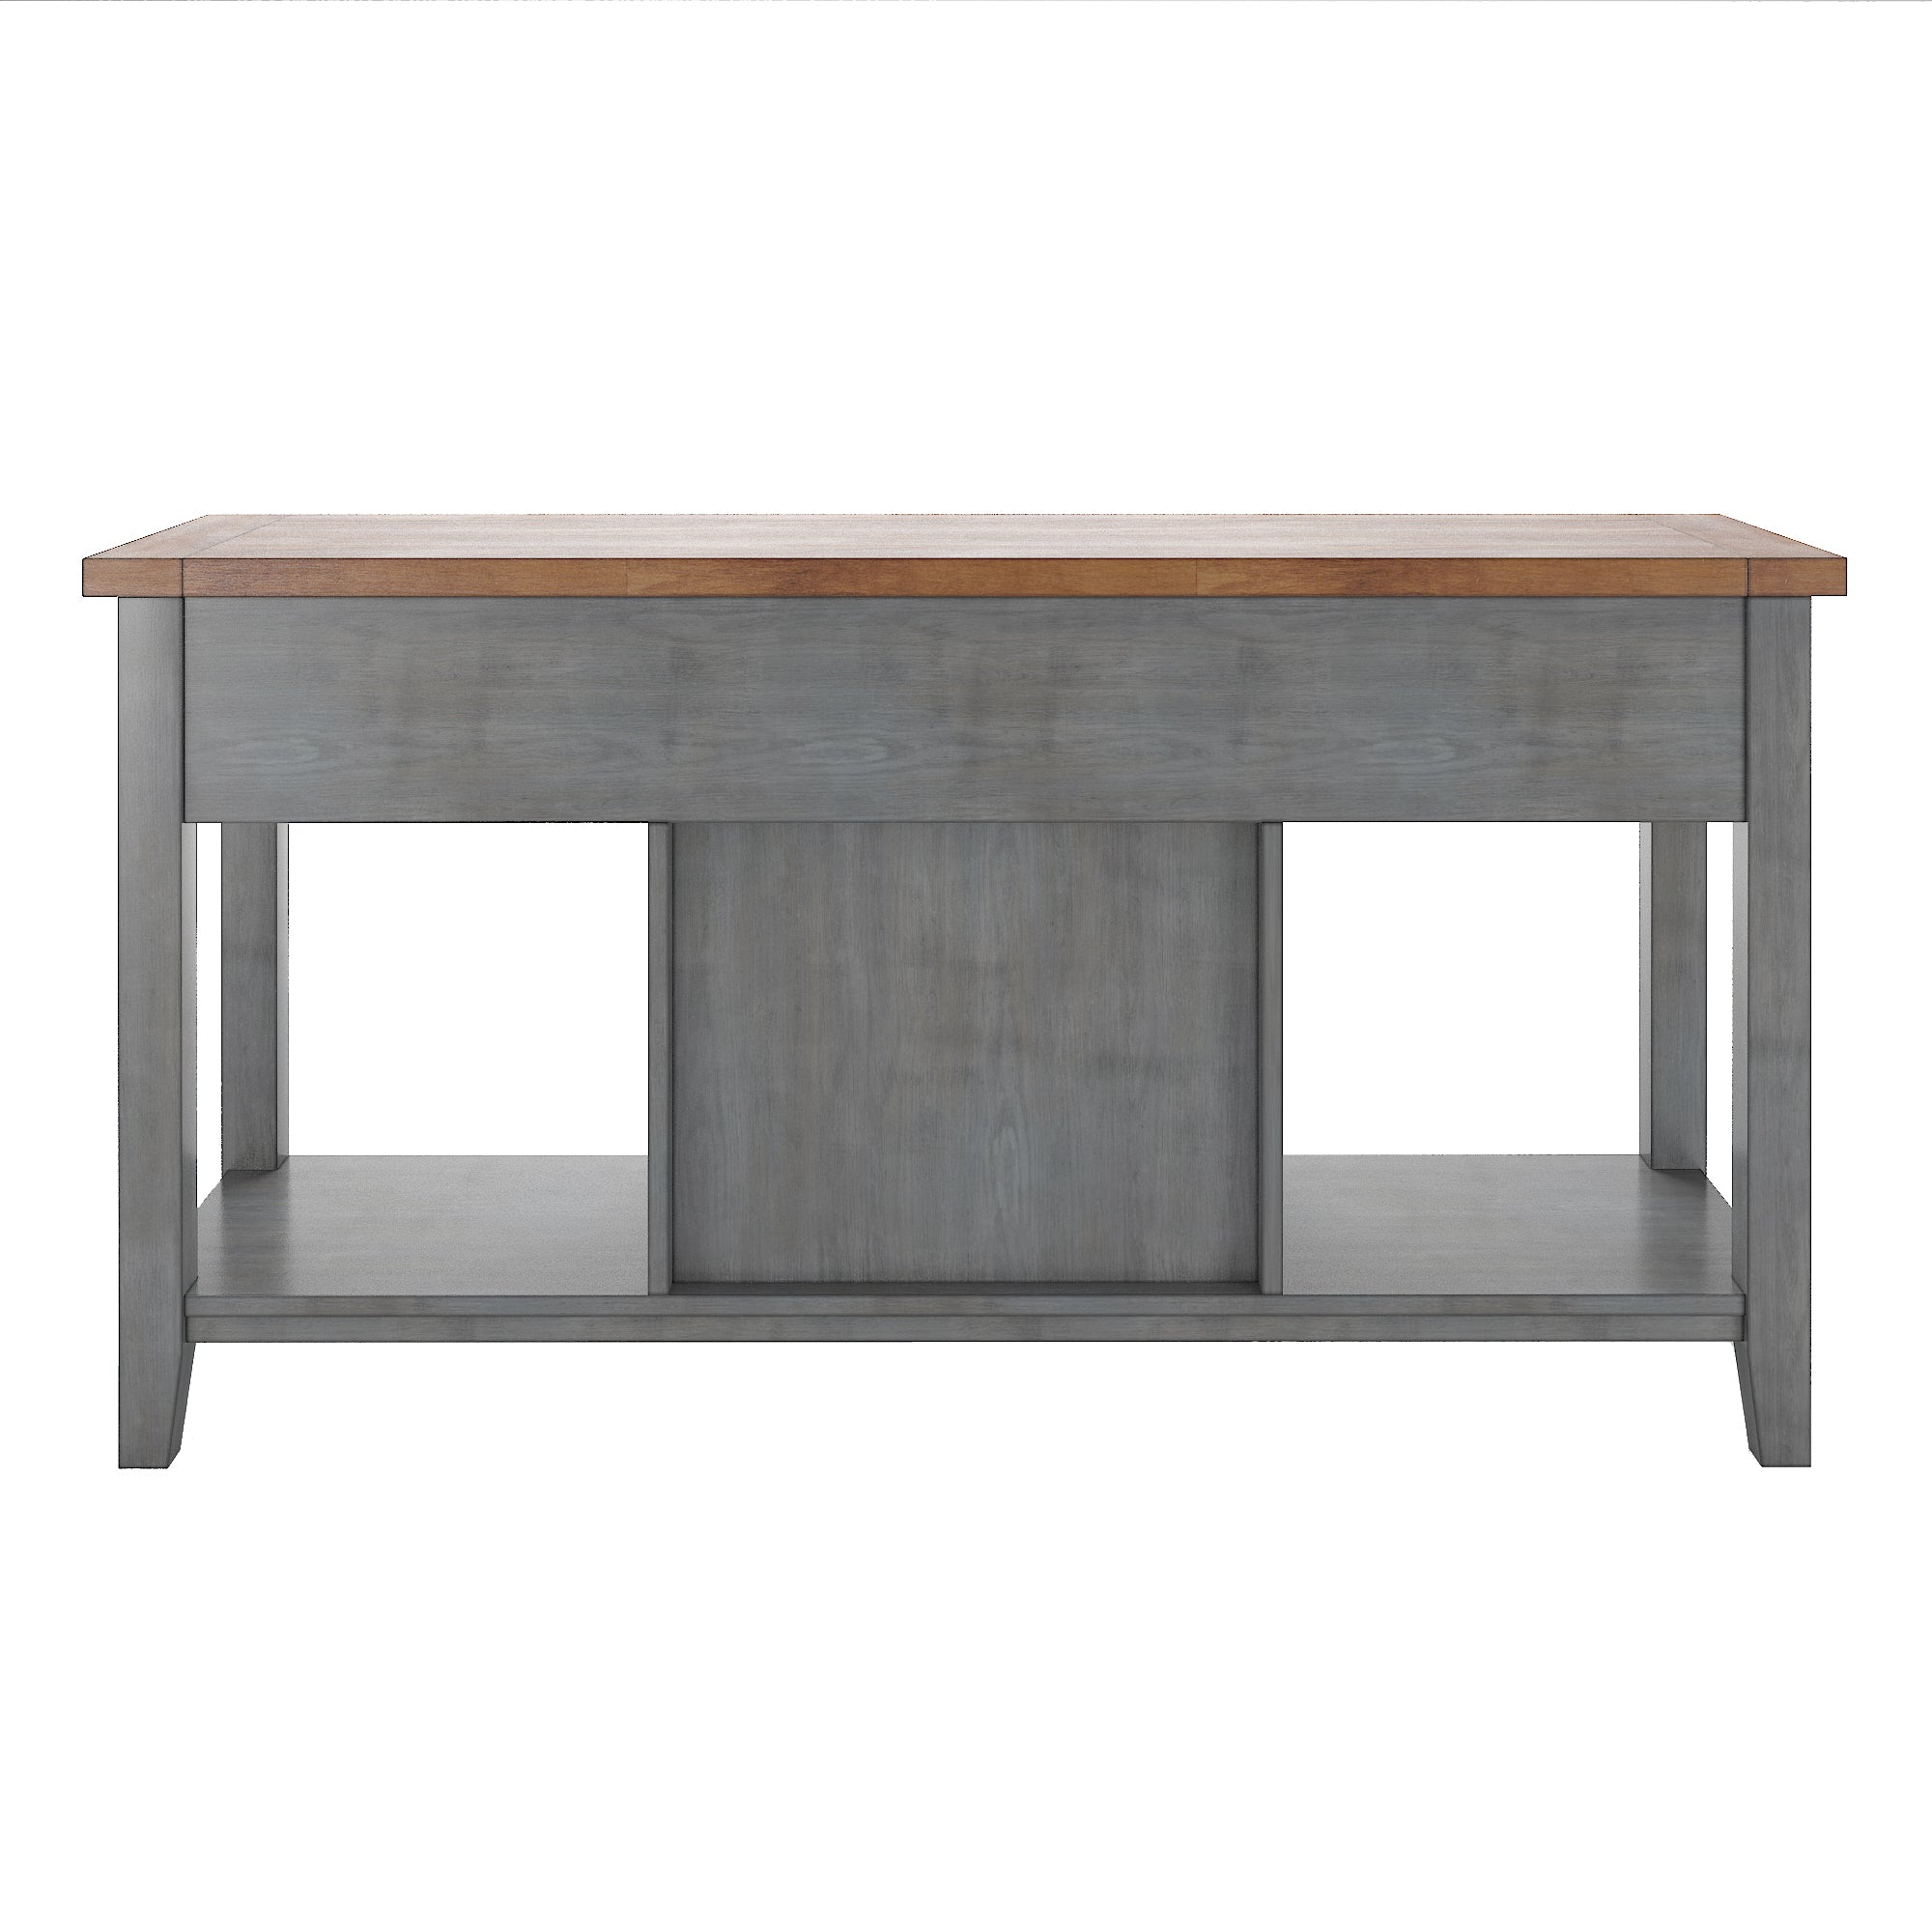 Local Pickup Only - Two-Tone Wood Wine Rack Buffet Server - Oak Finish Top with Antique Grey Finish Base